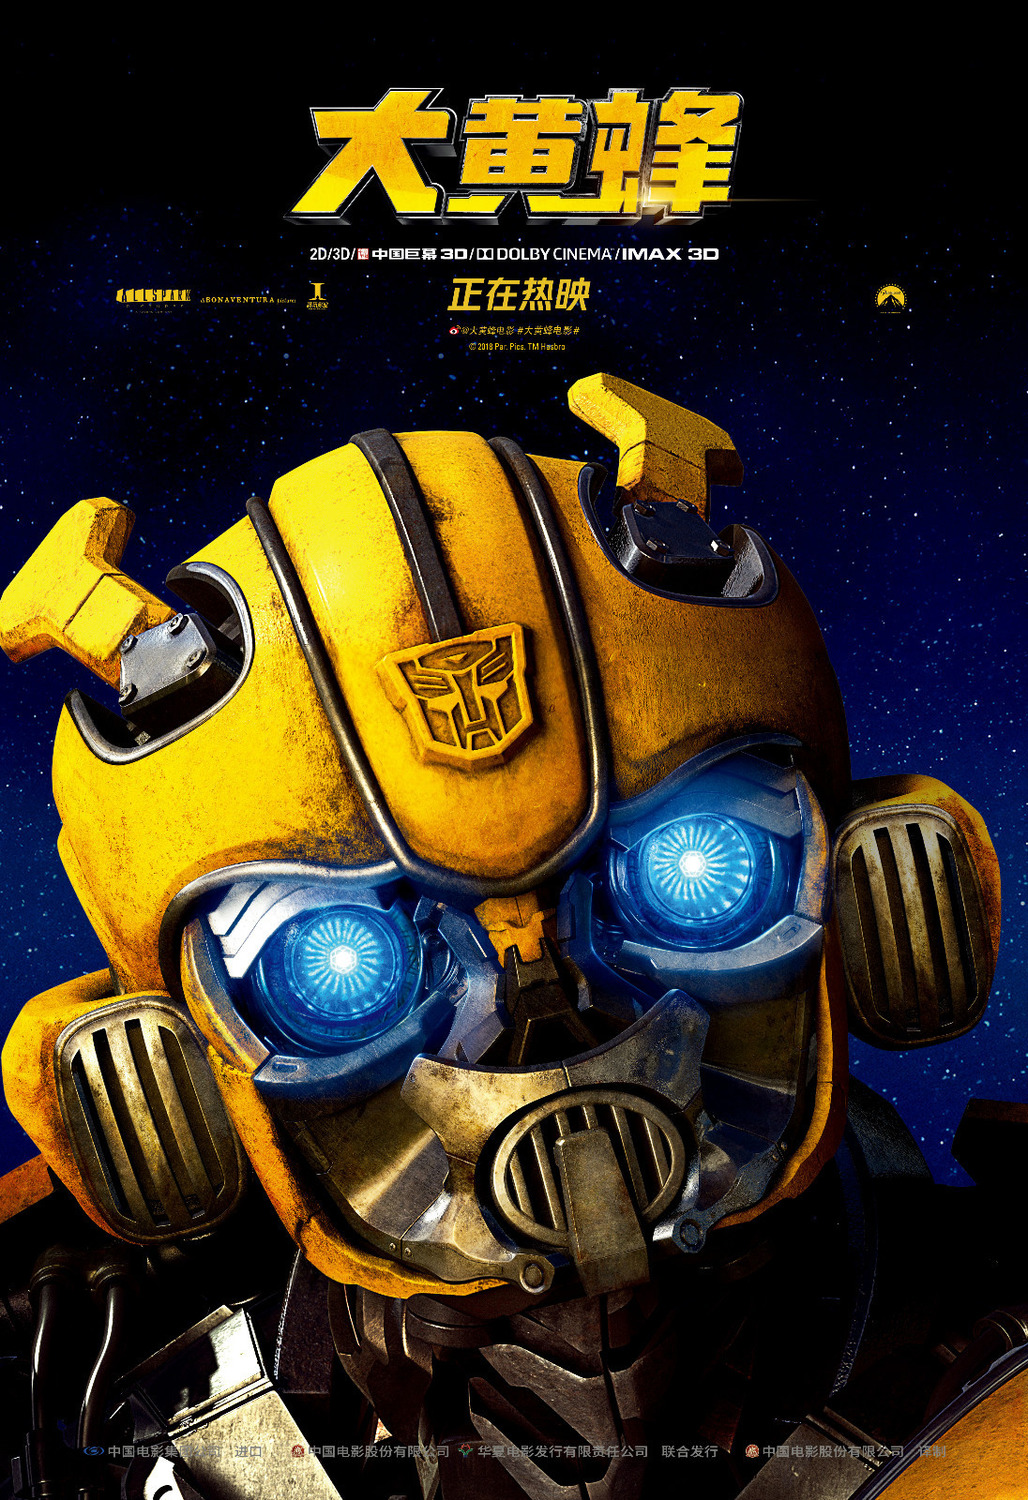 Extra Large Movie Poster Image for Bumblebee (#21 of 21)